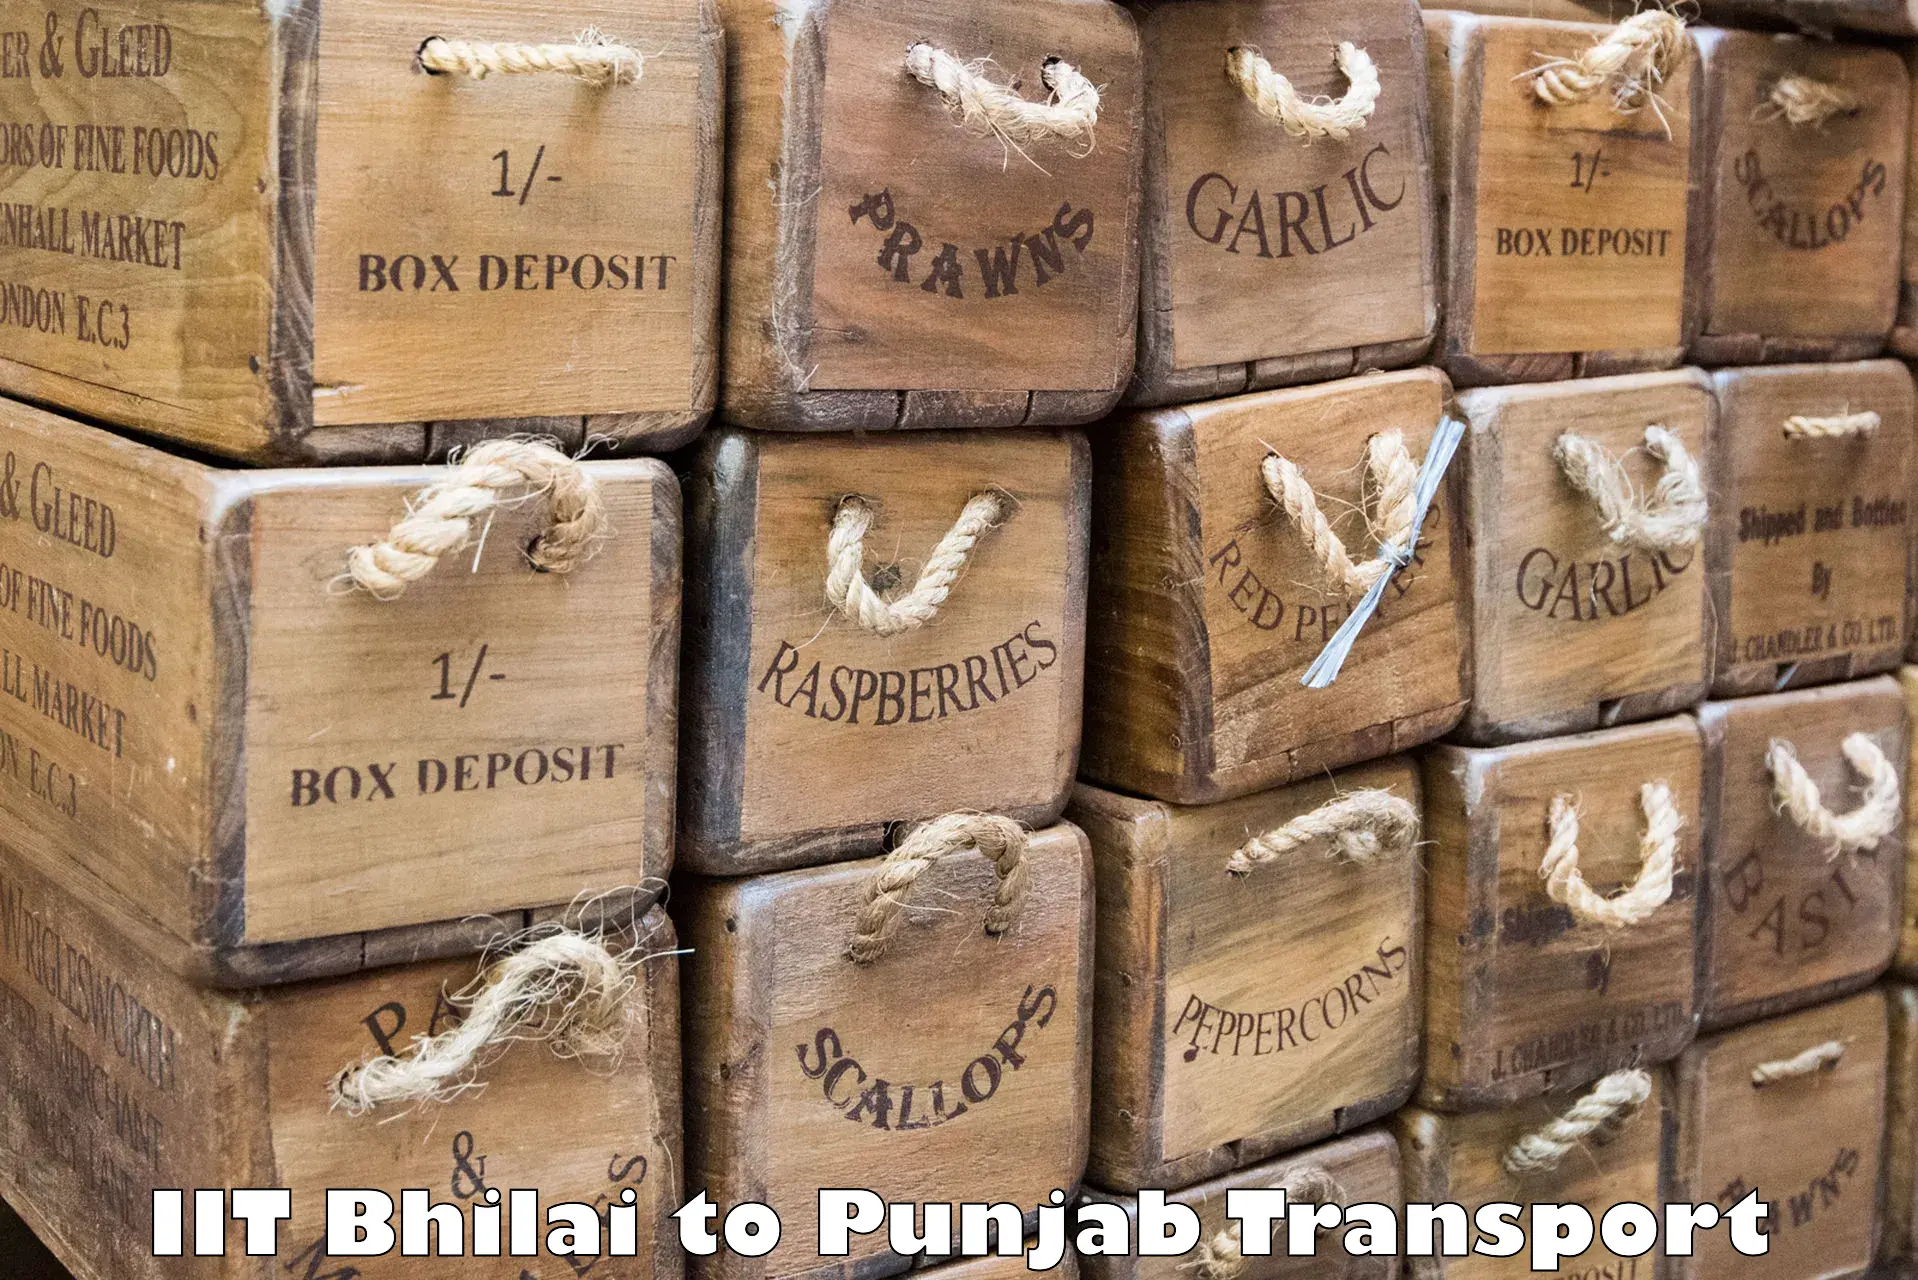 Commercial transport service IIT Bhilai to Firozpur